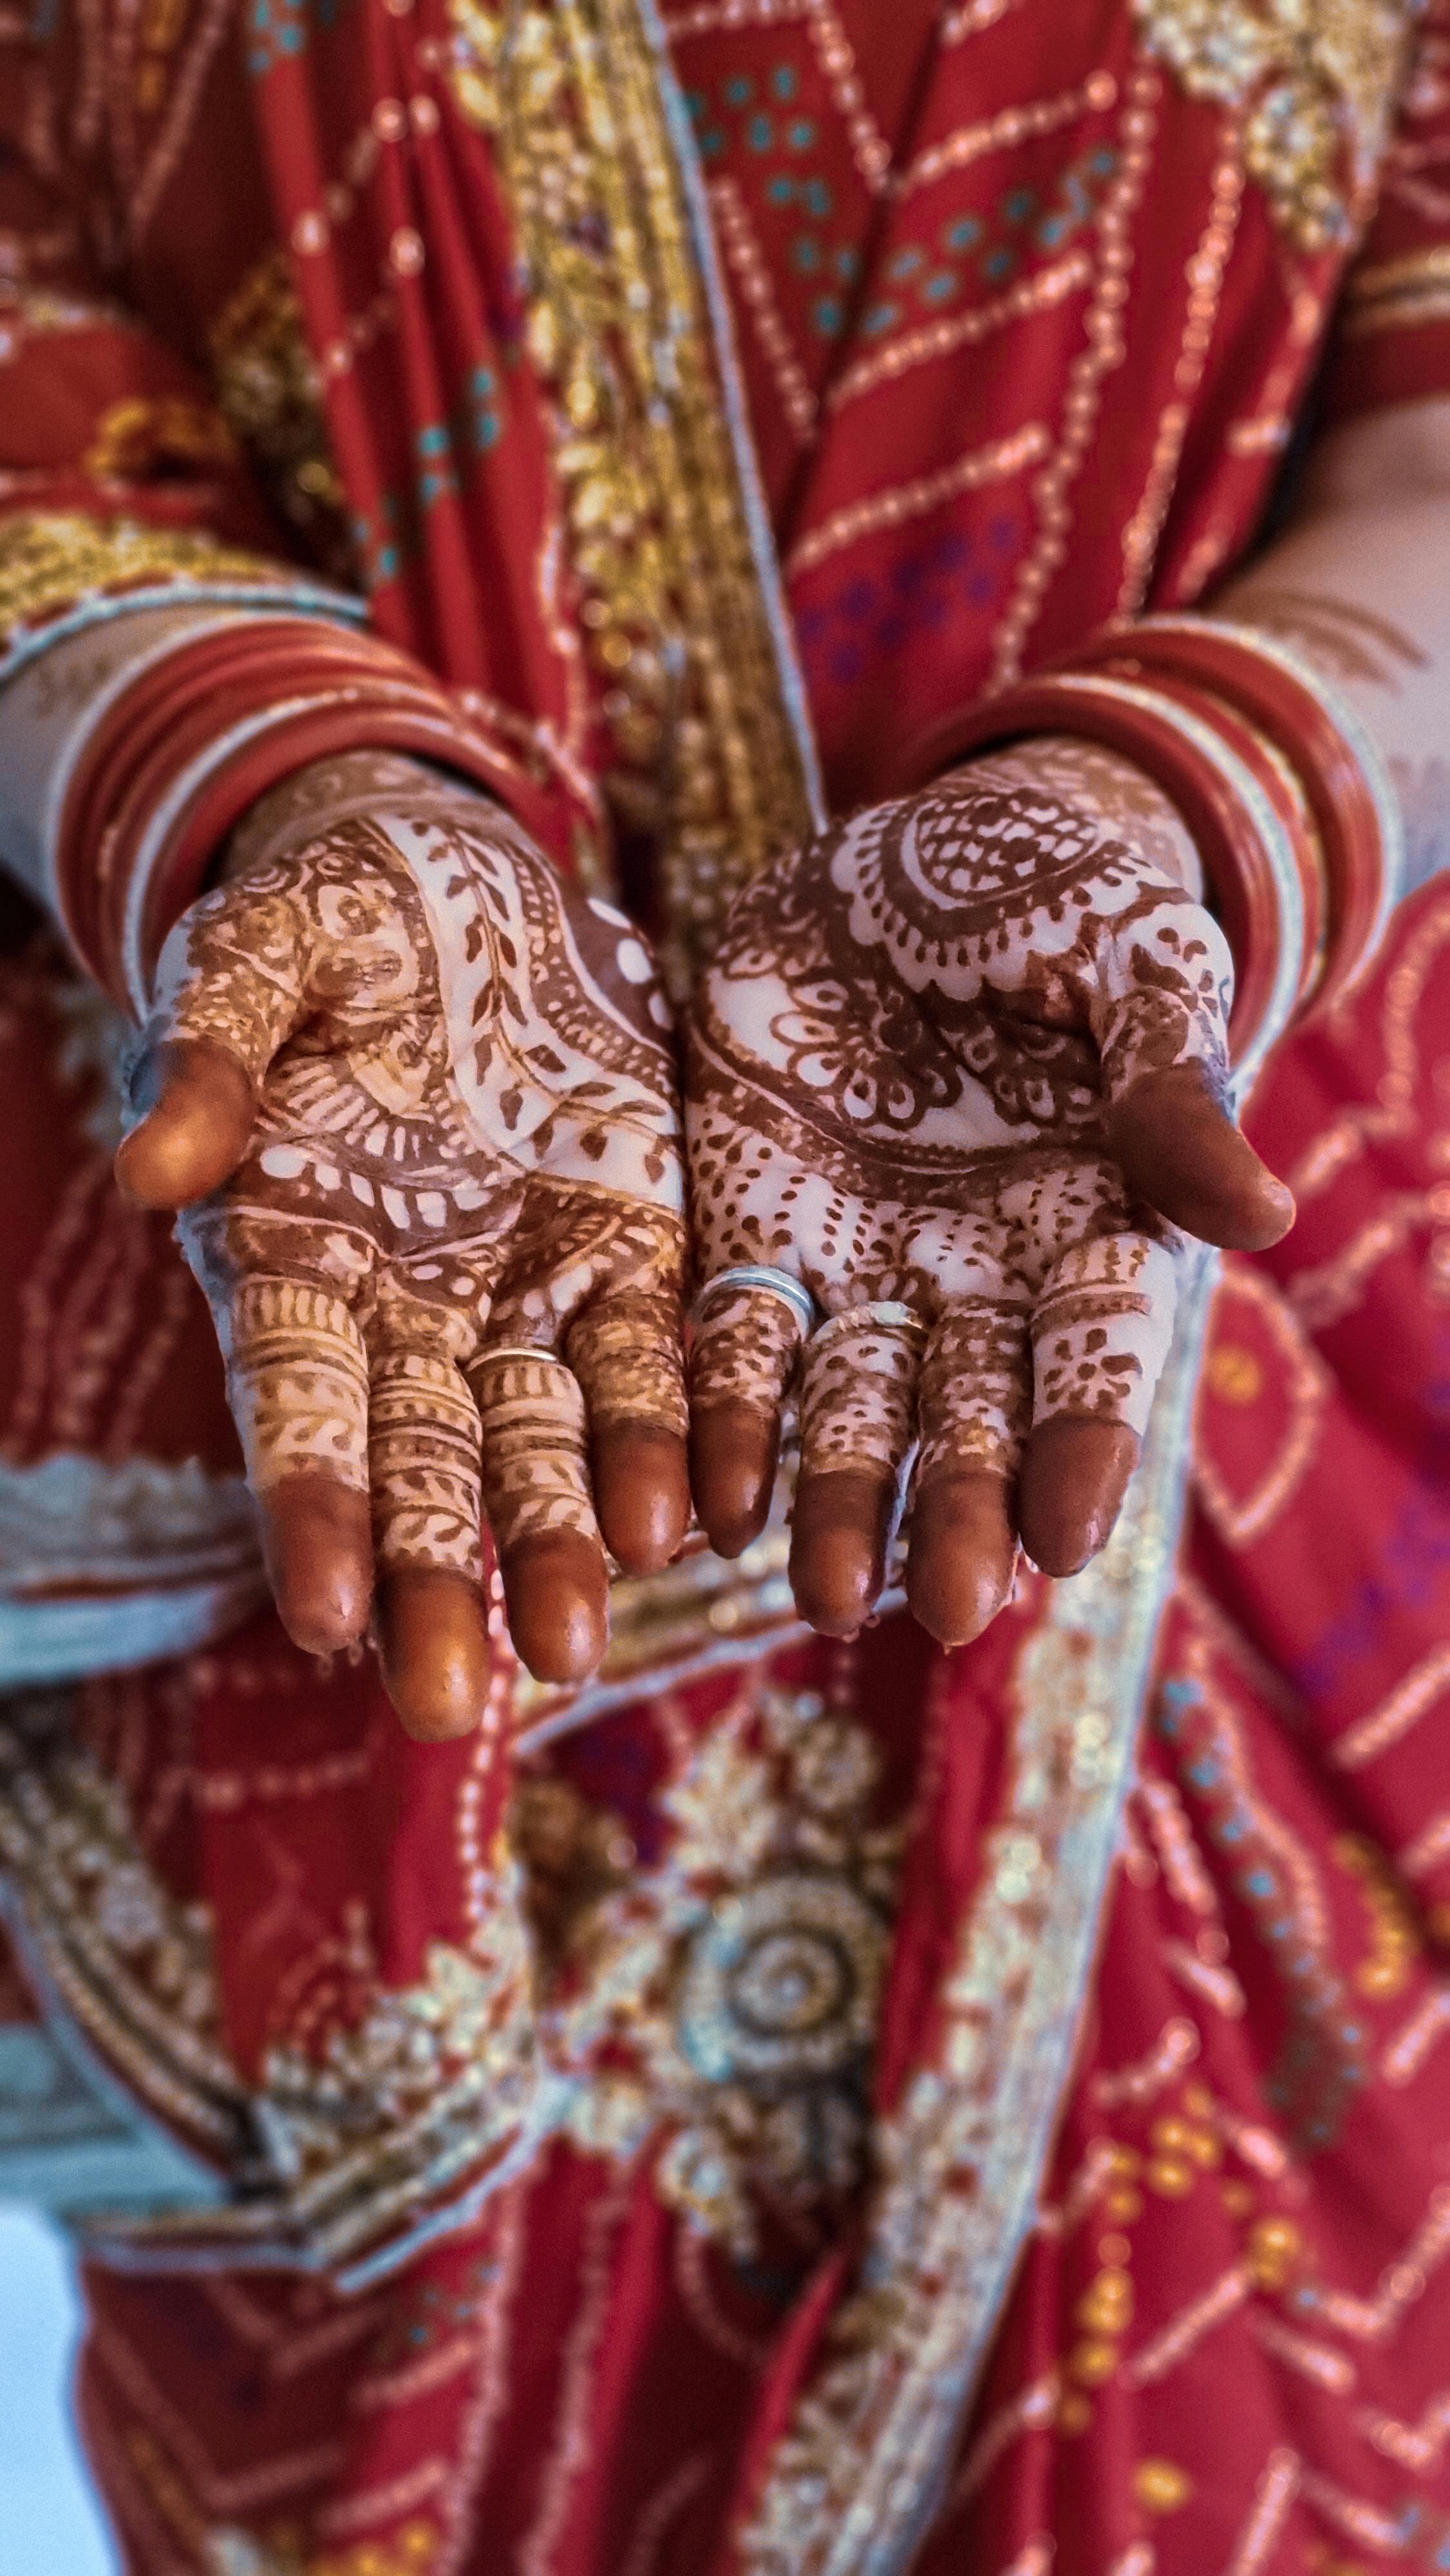 What Do Indian Henna Tattoos Mean  The Skull and Sword